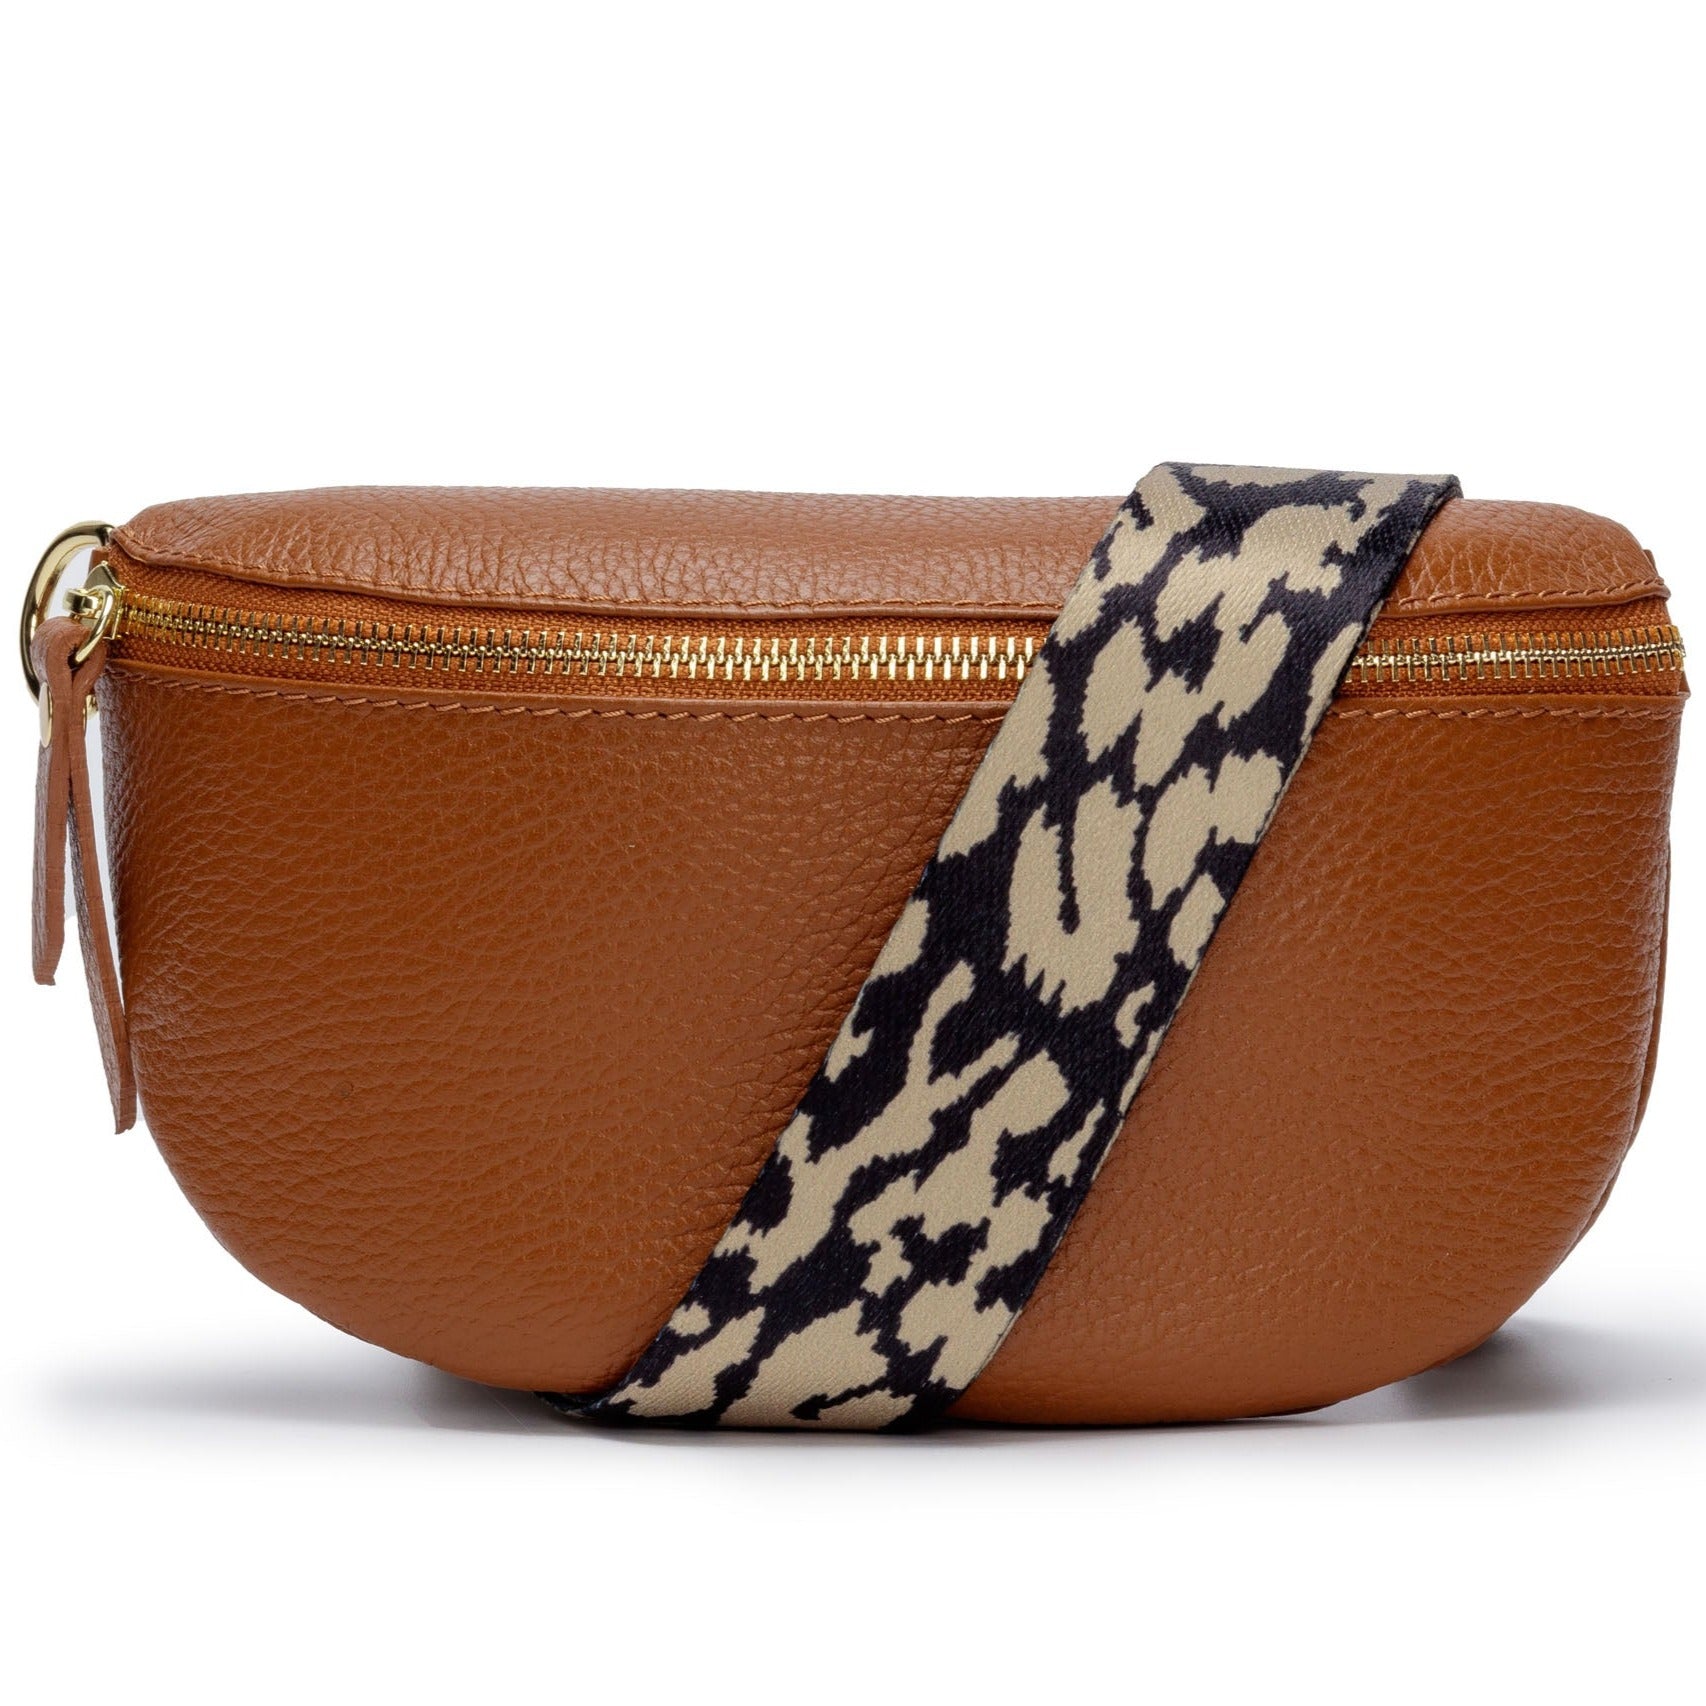 Sling Bag with Printed Strap